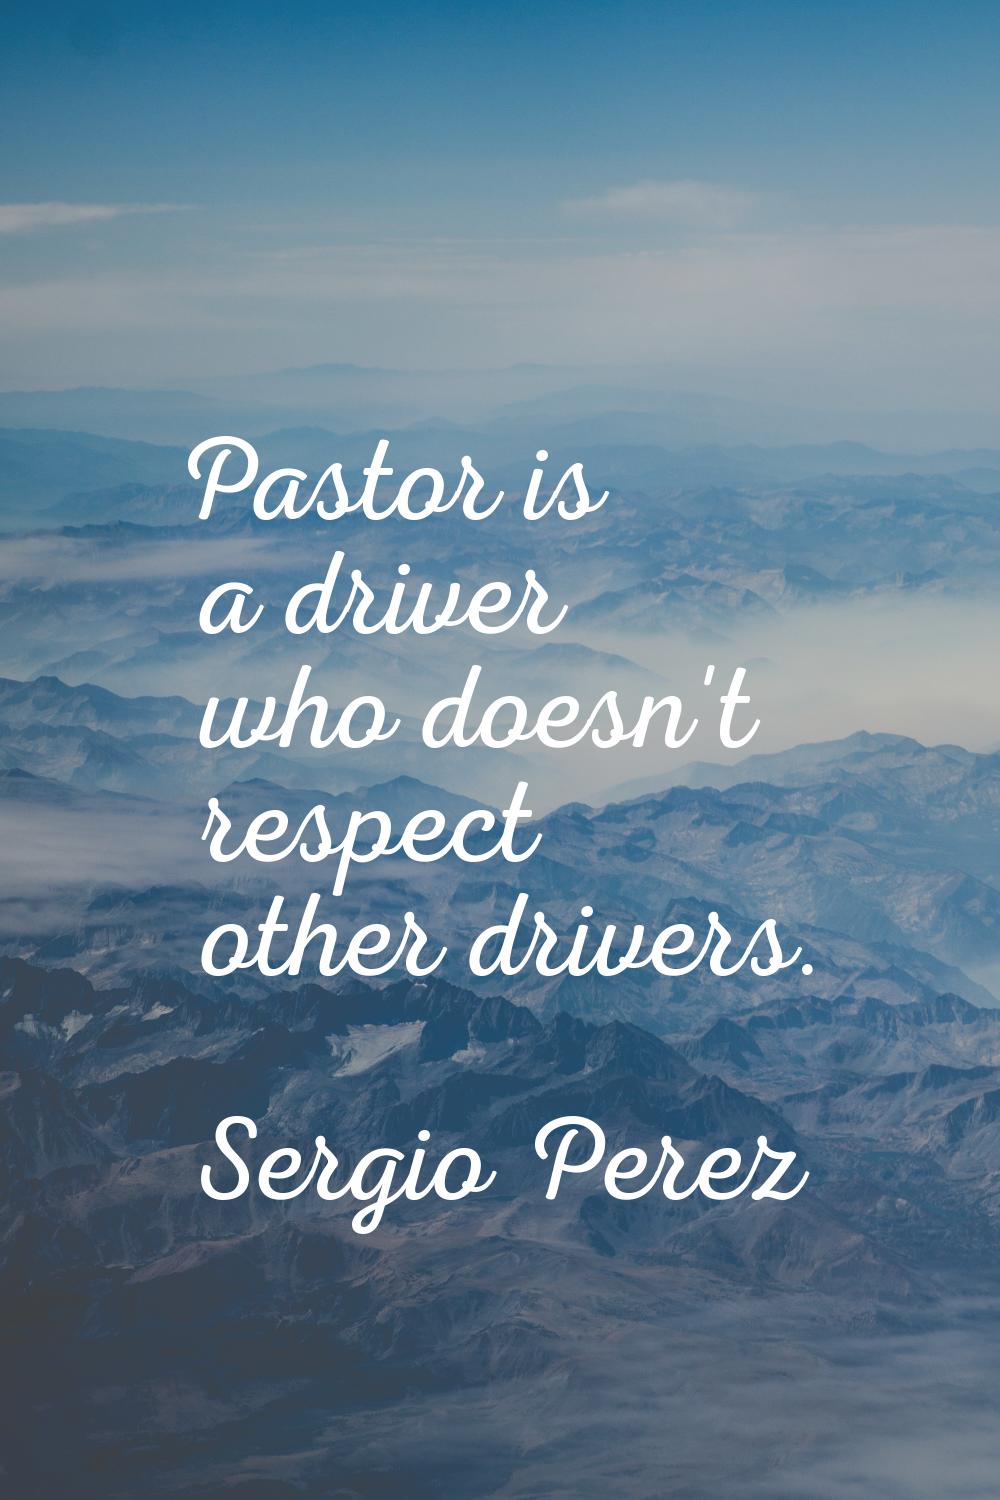 Pastor is a driver who doesn't respect other drivers.